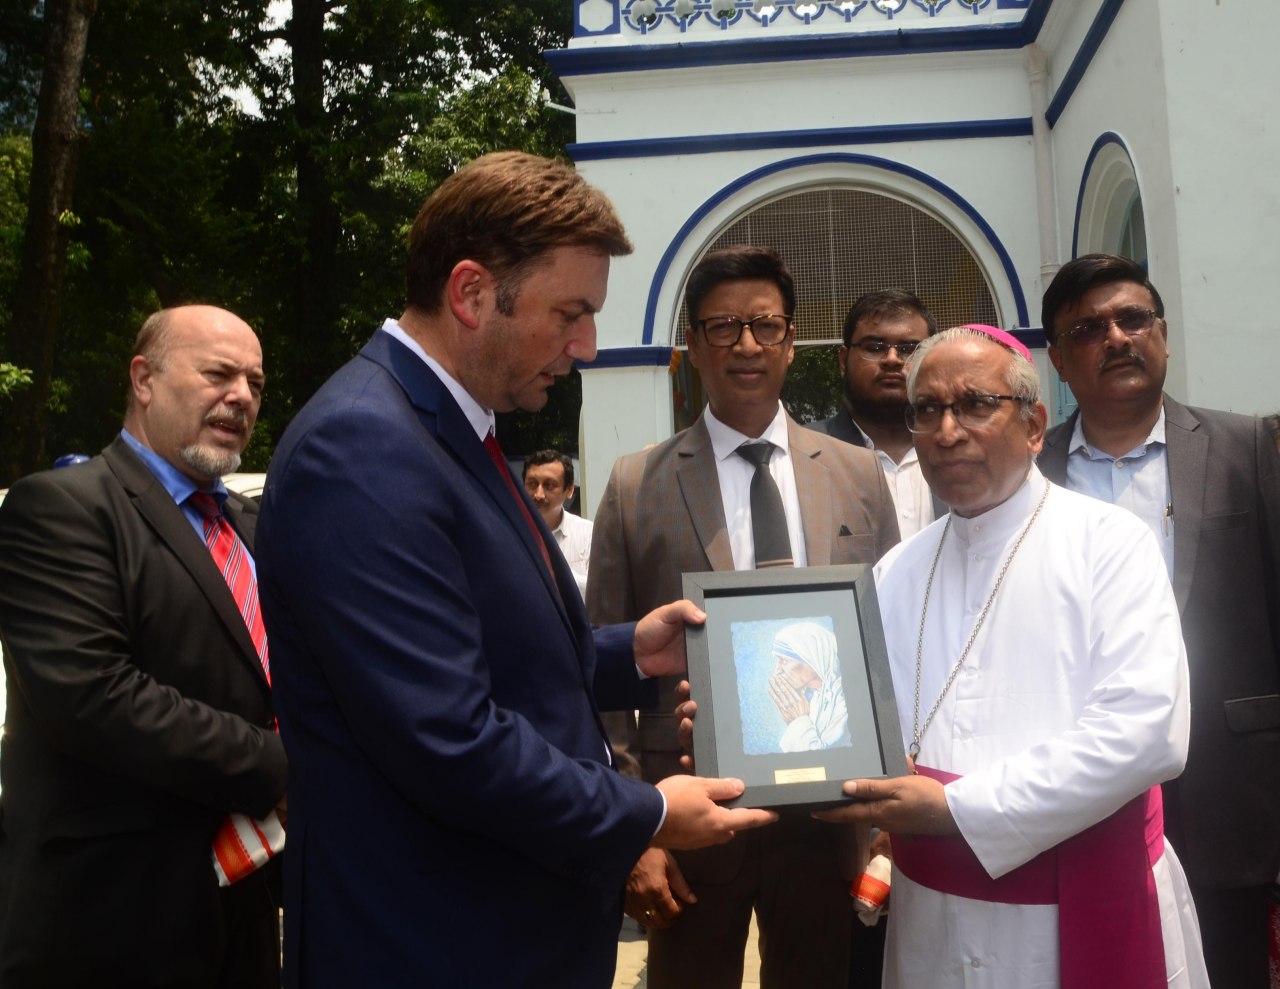 A delegation from The Republic of North Macedonia visited Kolkata and met the Archbishop at a function to pay homage to Mother Teresa. From left - His Excellency, Mr Slobodan Uzunov, Ambassador to India, His Excellency, Mr Bujar Osmani, Foreign Affairs Minister, Mr Namit Bajoria, Honorary Consul of the Republic of North Macedonia in Kolkata, Archbishop of Kolkata, His Grace, Thomas D'Souza handing over and framed picture of Mother Teresa to Mr Osmani at a function at the Archbishop House in Kolkata along with Mr Subrata Ganguly of Church Art.